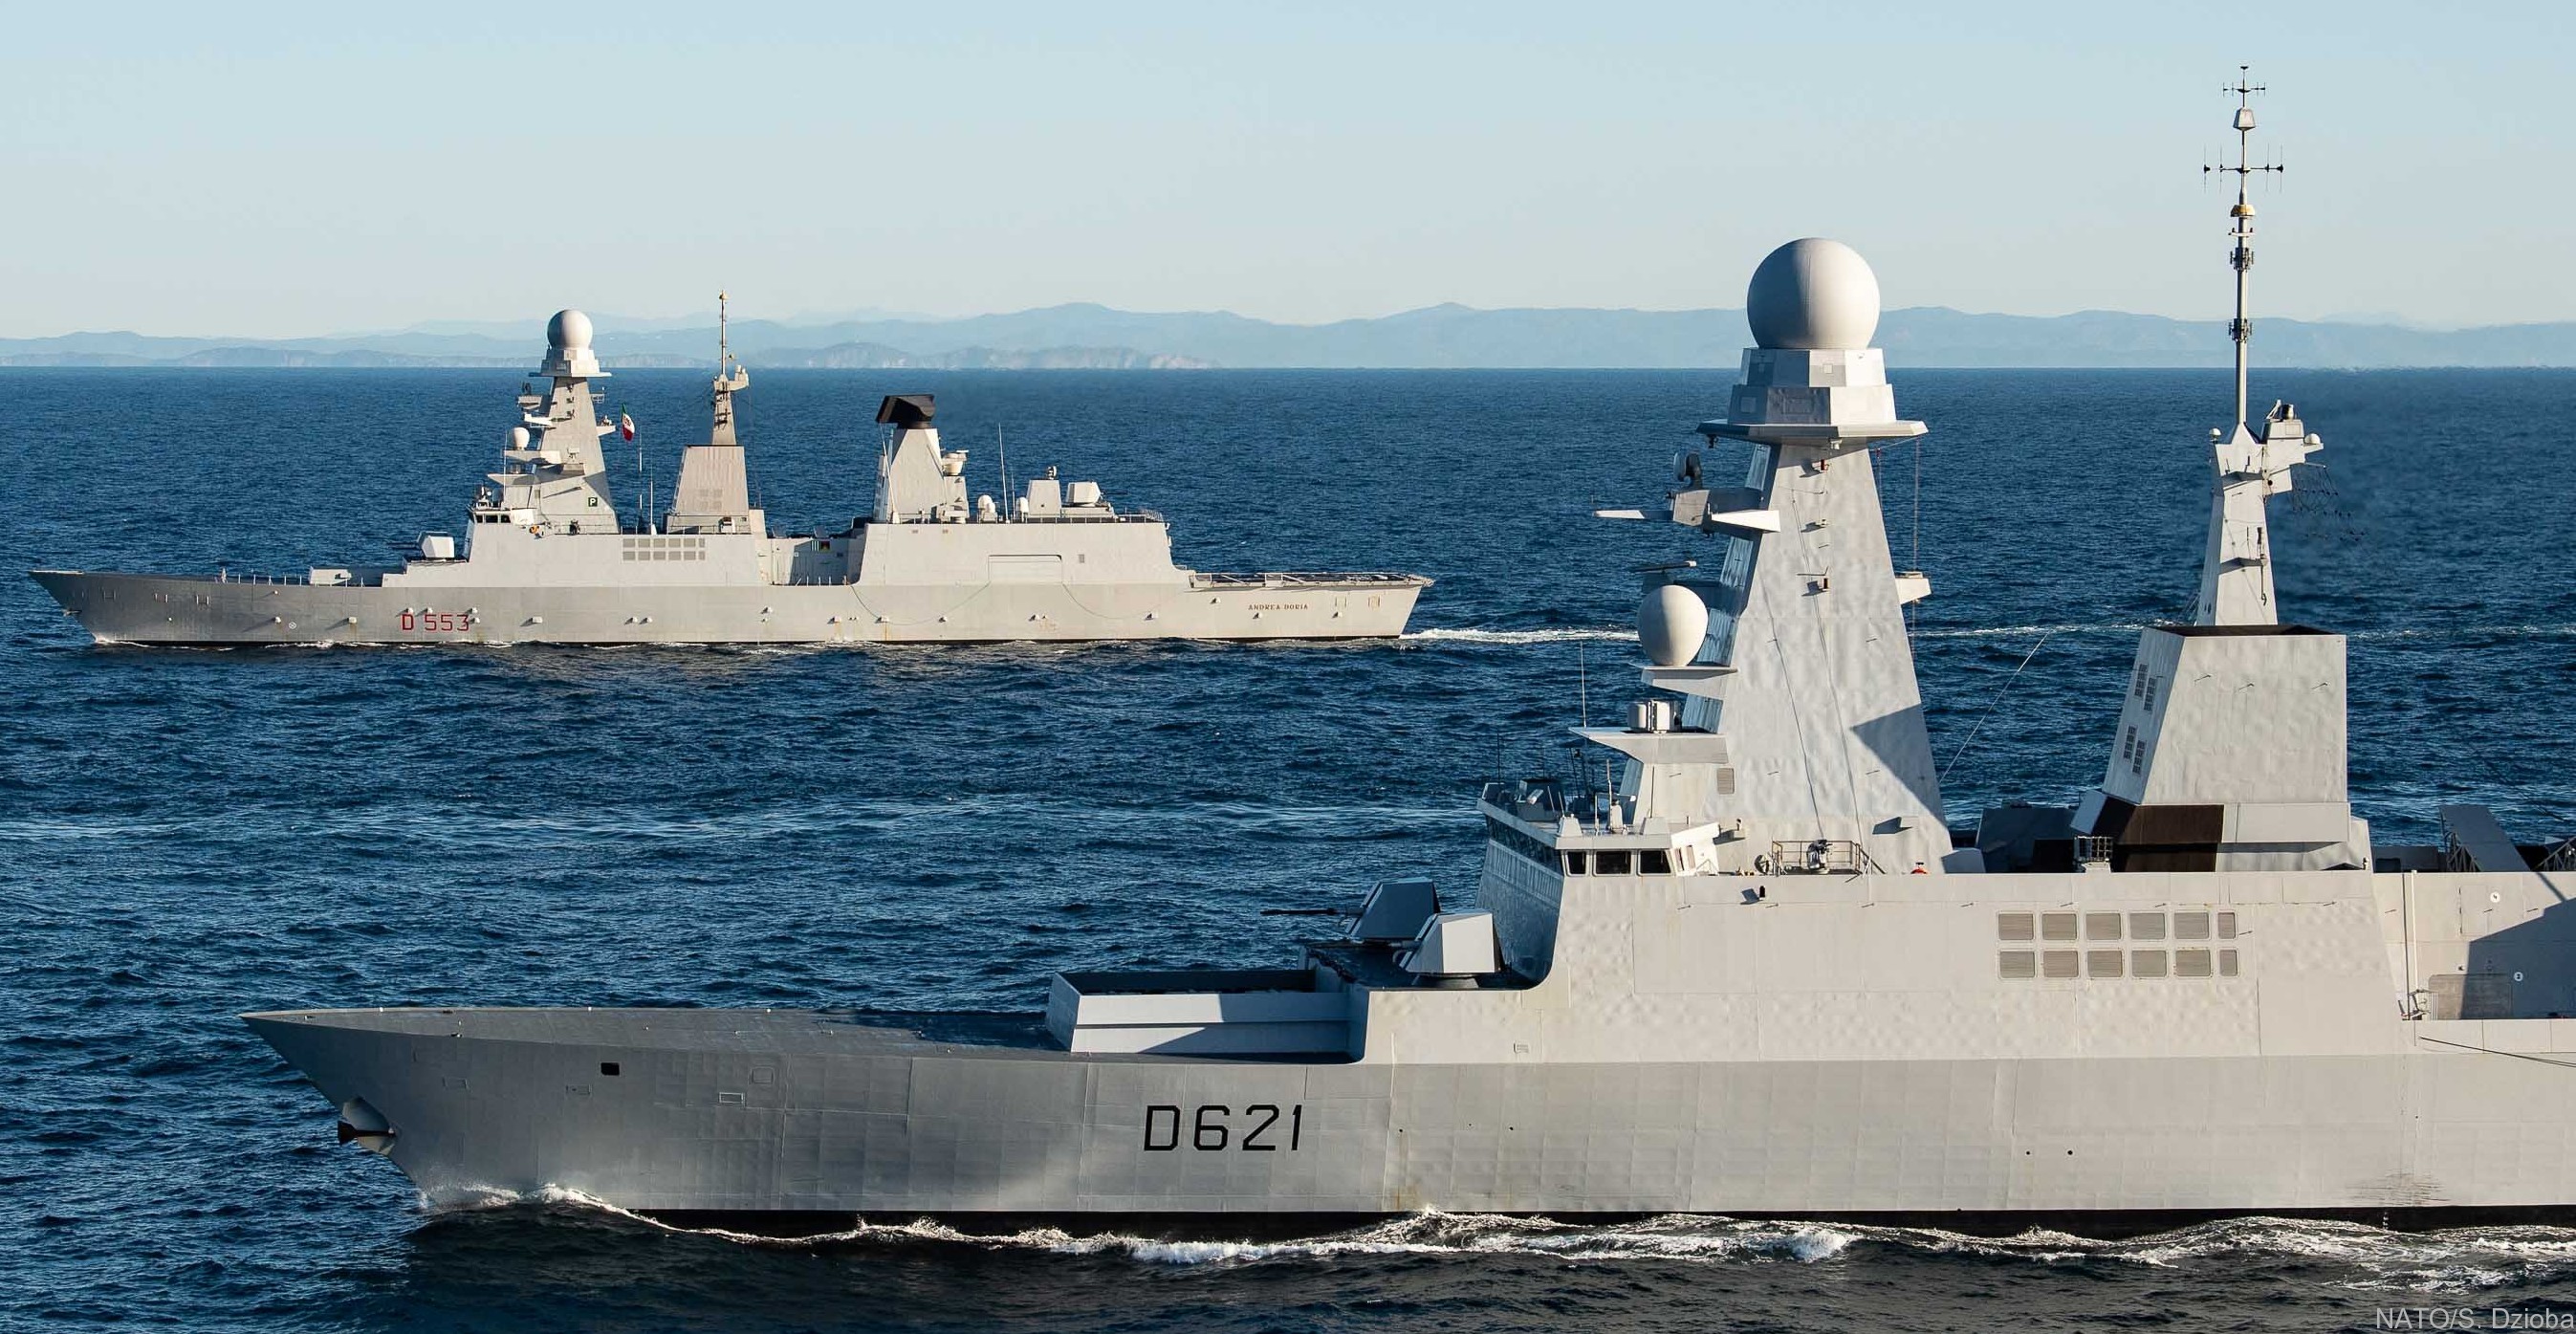 d-621 fs chevalier paul forbin horizon class guided missile frigate anti-air-warfare aaw ffgh french navy marine nationale 17